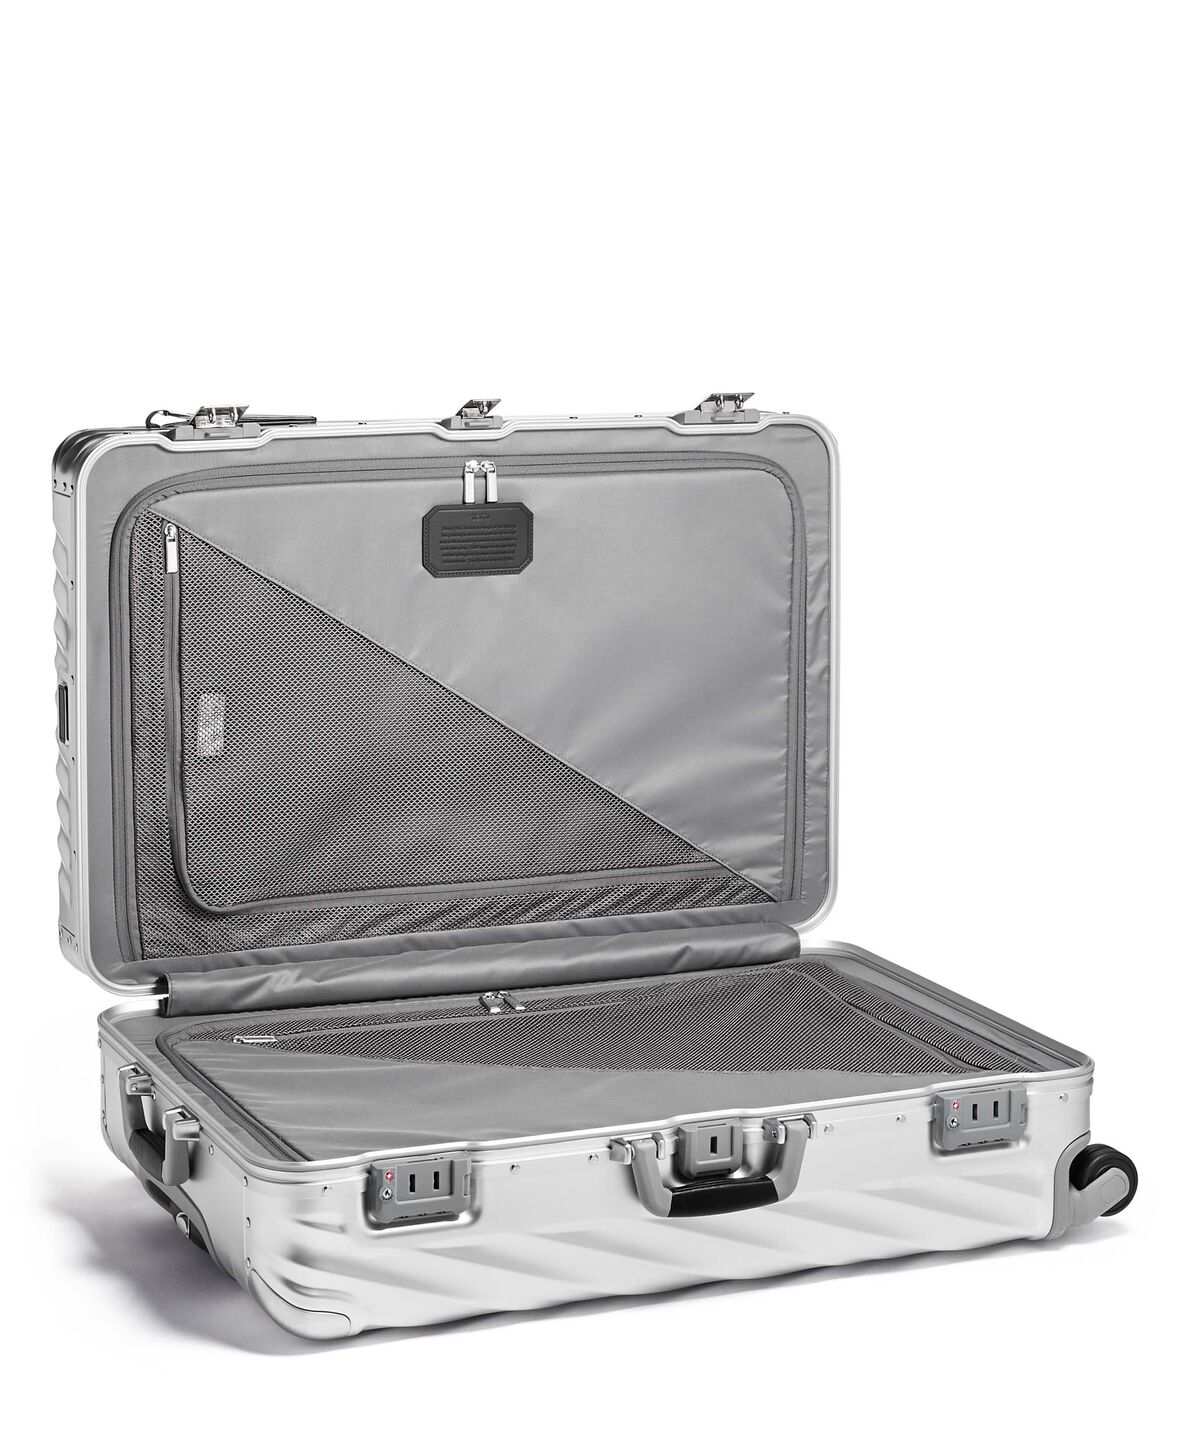 19 Degree Aluminium Extended Trip Checked Luggage 77,5 cm